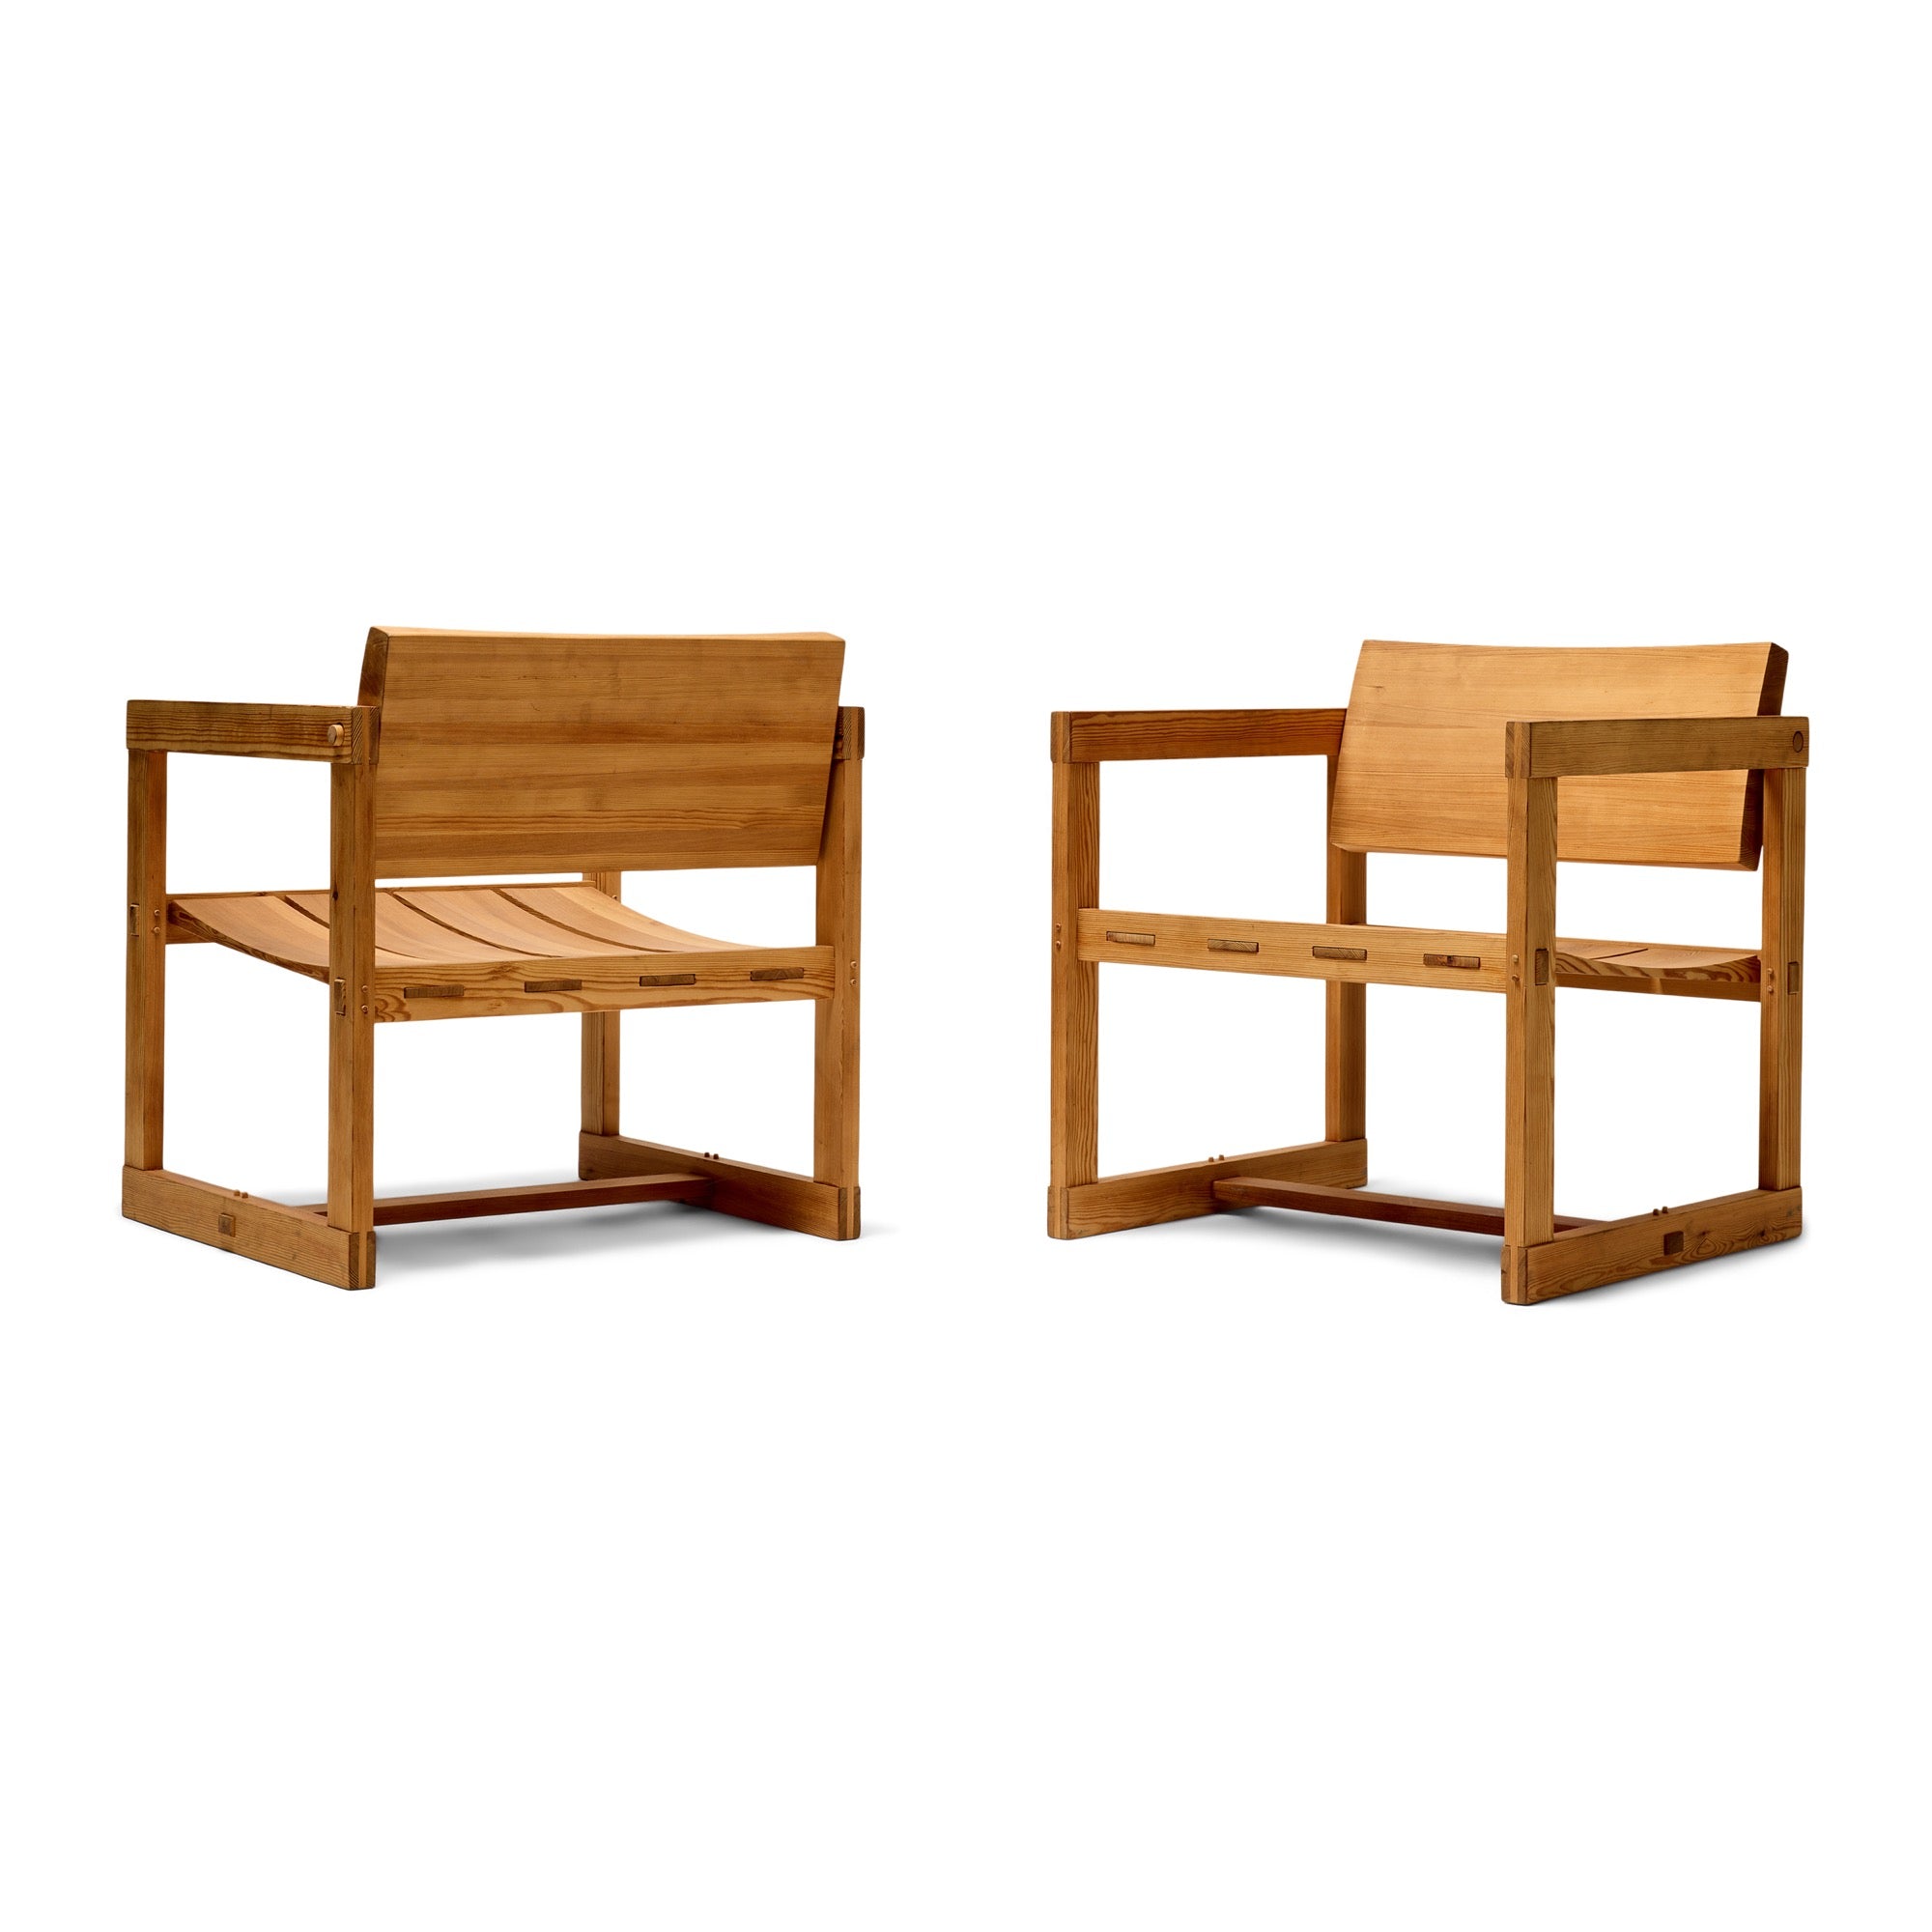 Pair of Solid Pine Lounge Chairs by Edvin Helseth for Trybo, 1966